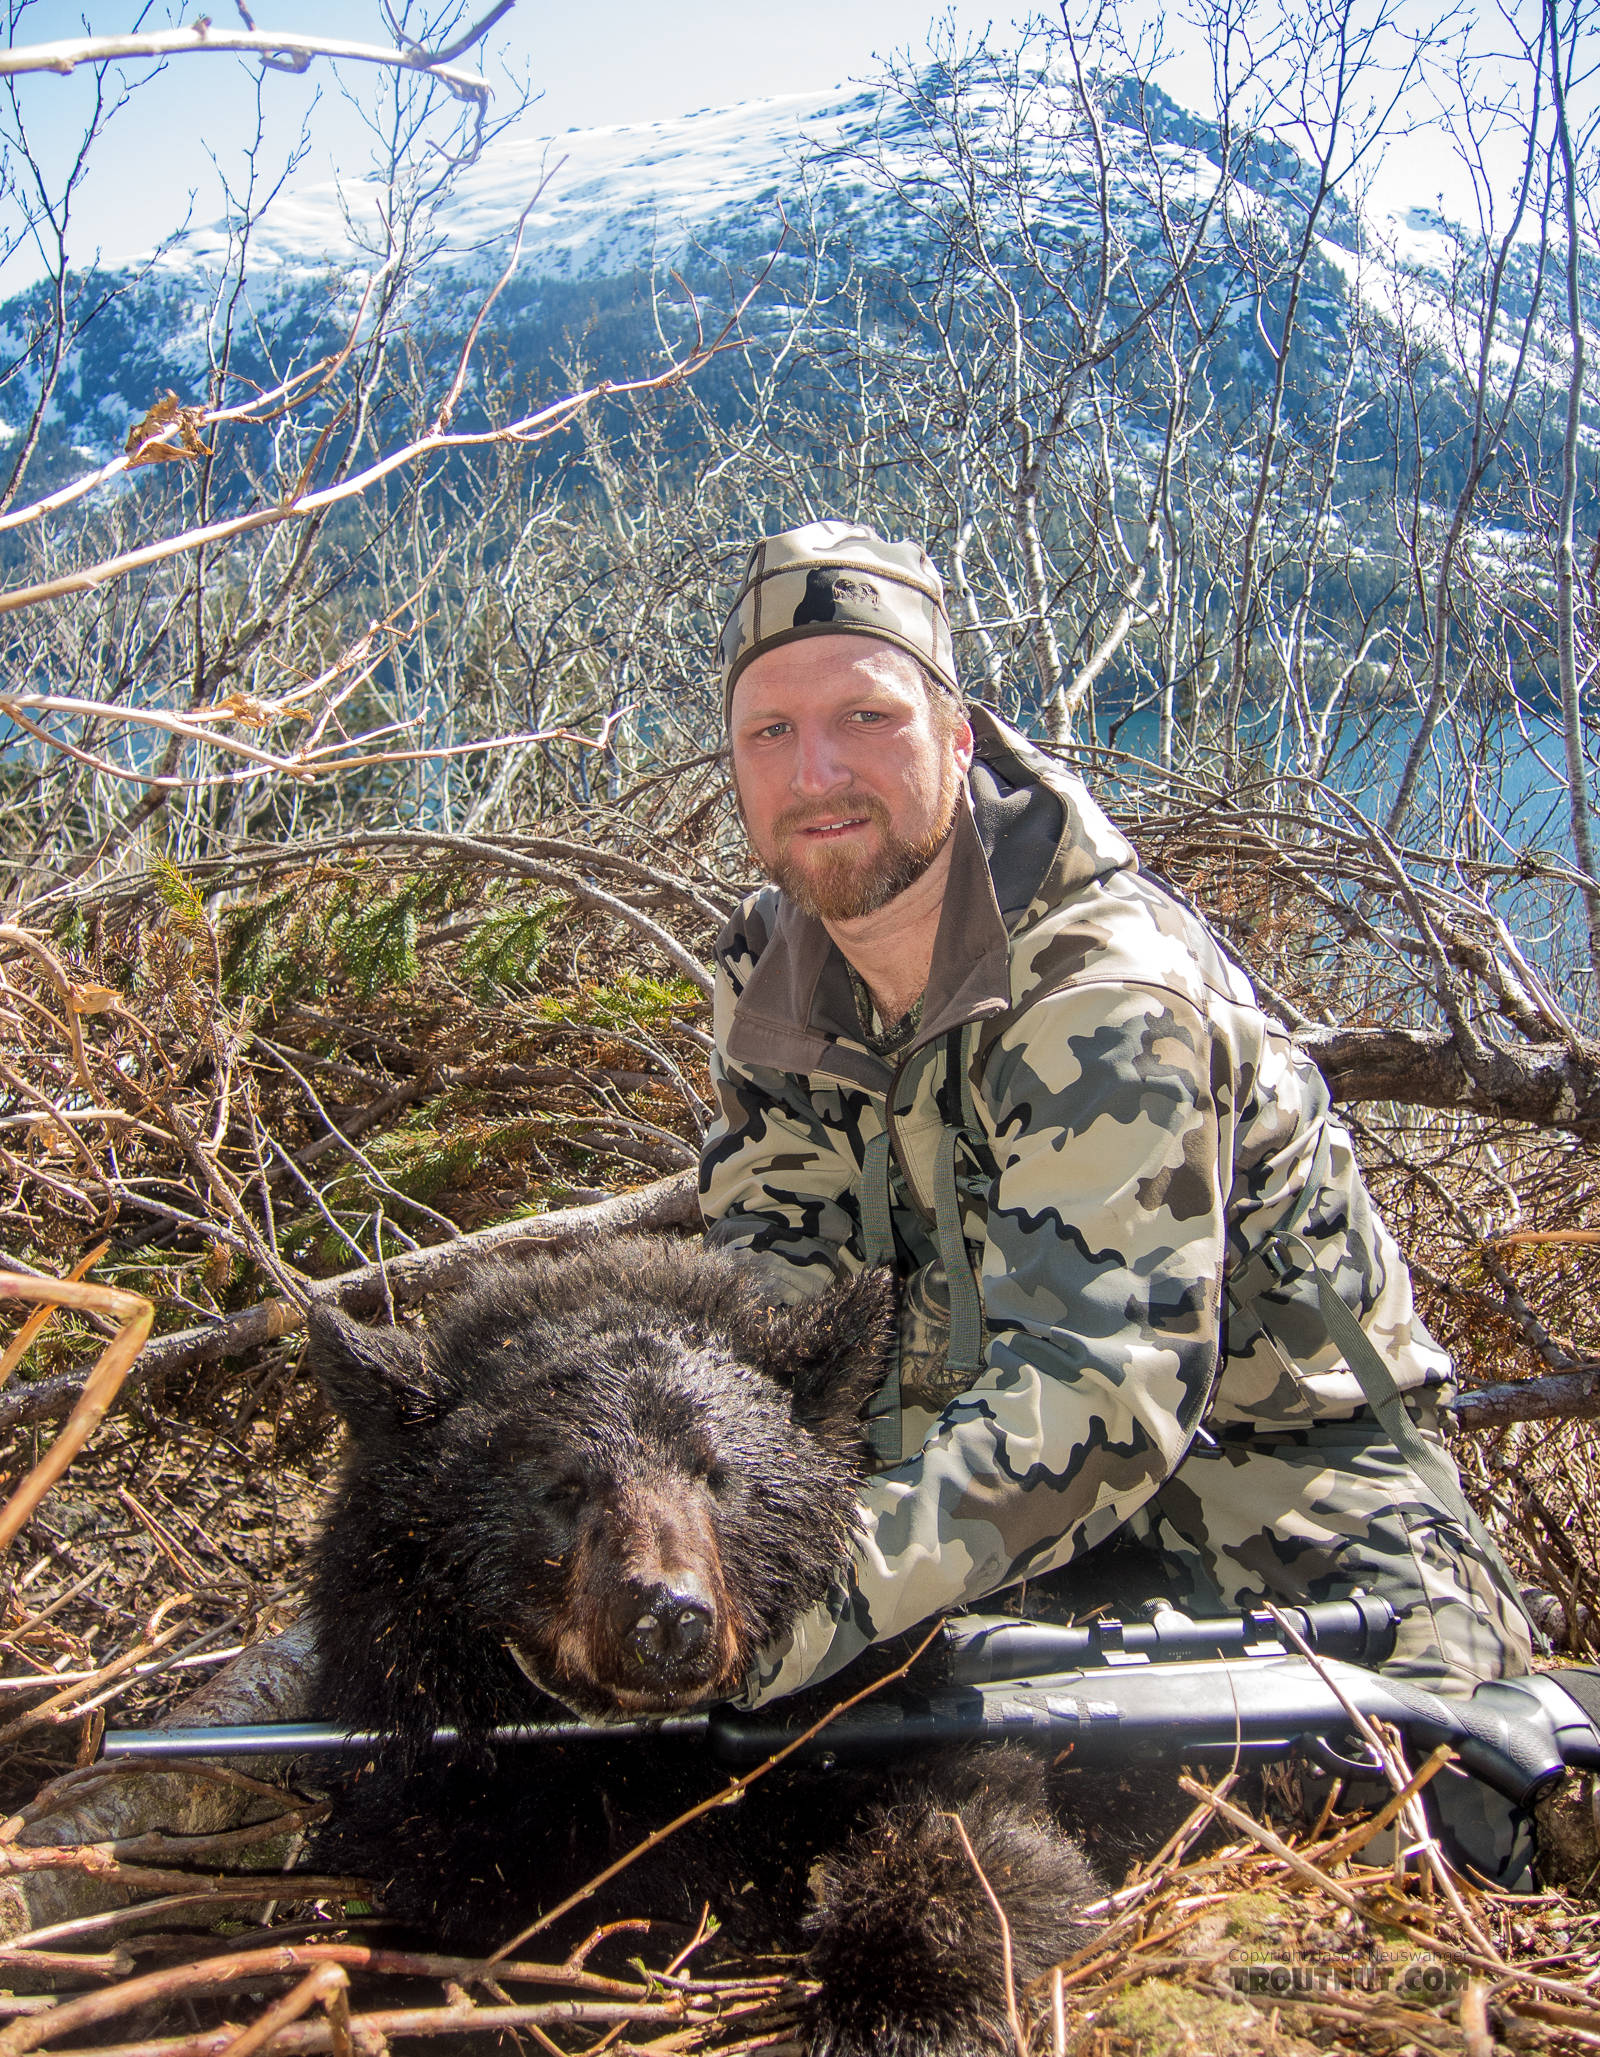 Troutnut's first bear! From Prince William Sound in Alaska.